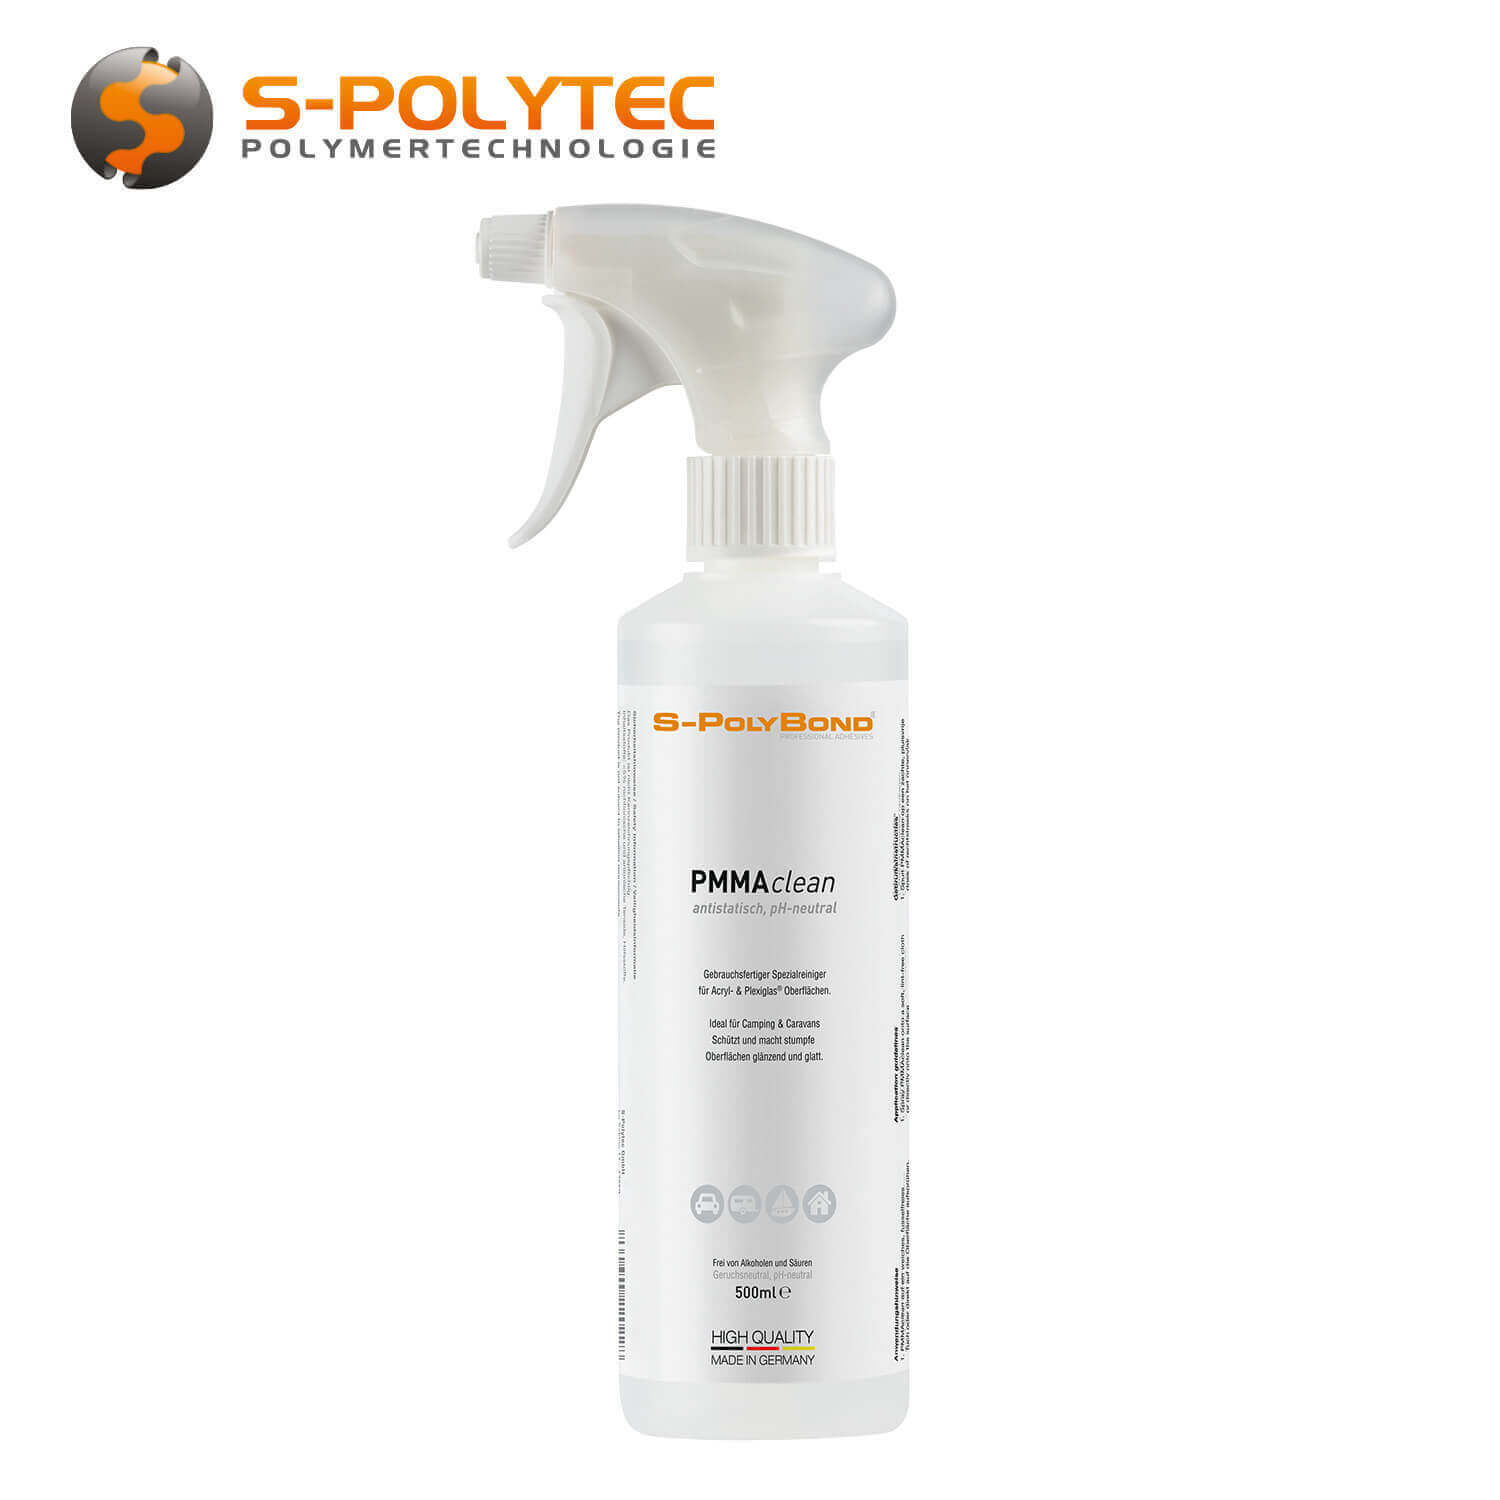 New from S-Polybond - Acrylic and plexiglass cleaner PMMAclean